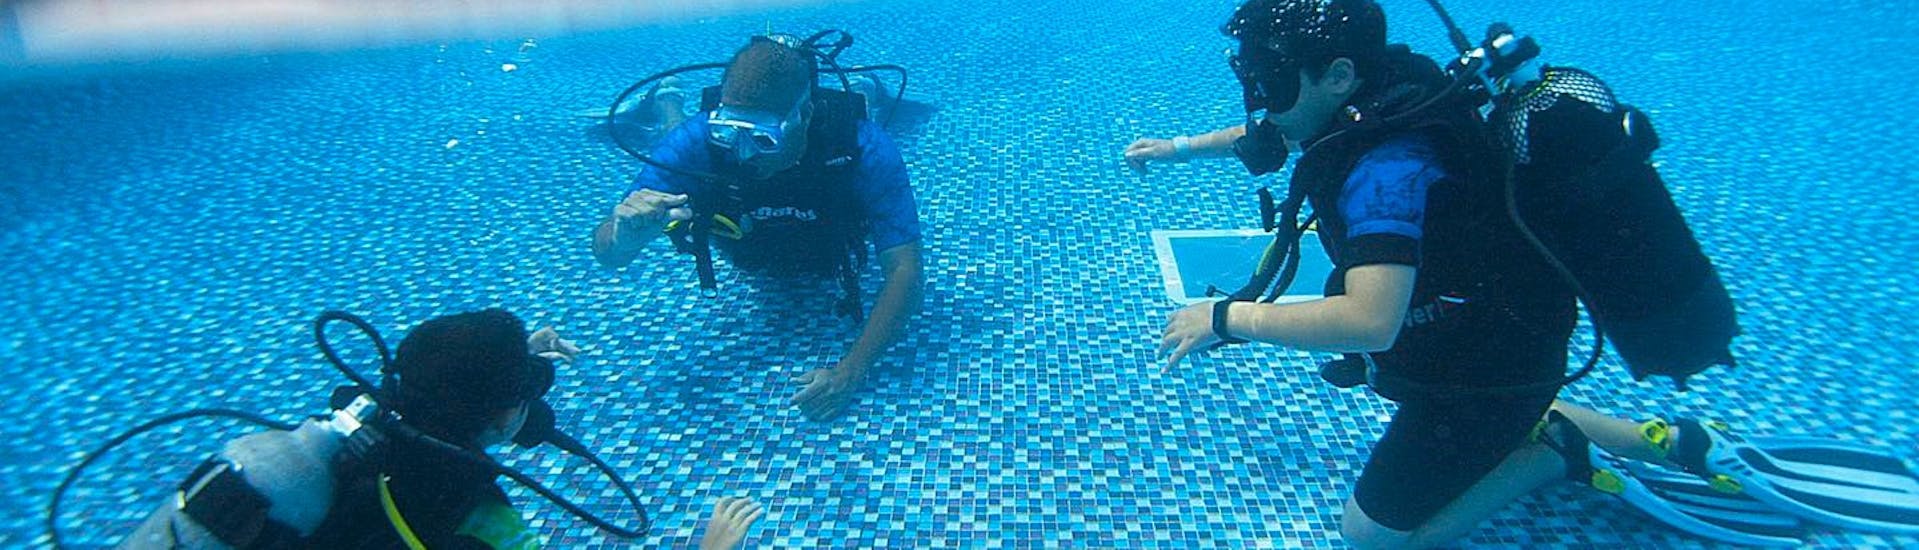 Half submerged camera image showing the scuba rangers from WeDive Lagos in the pool below the surface, while above the surface a volleyball net spans across the pool.